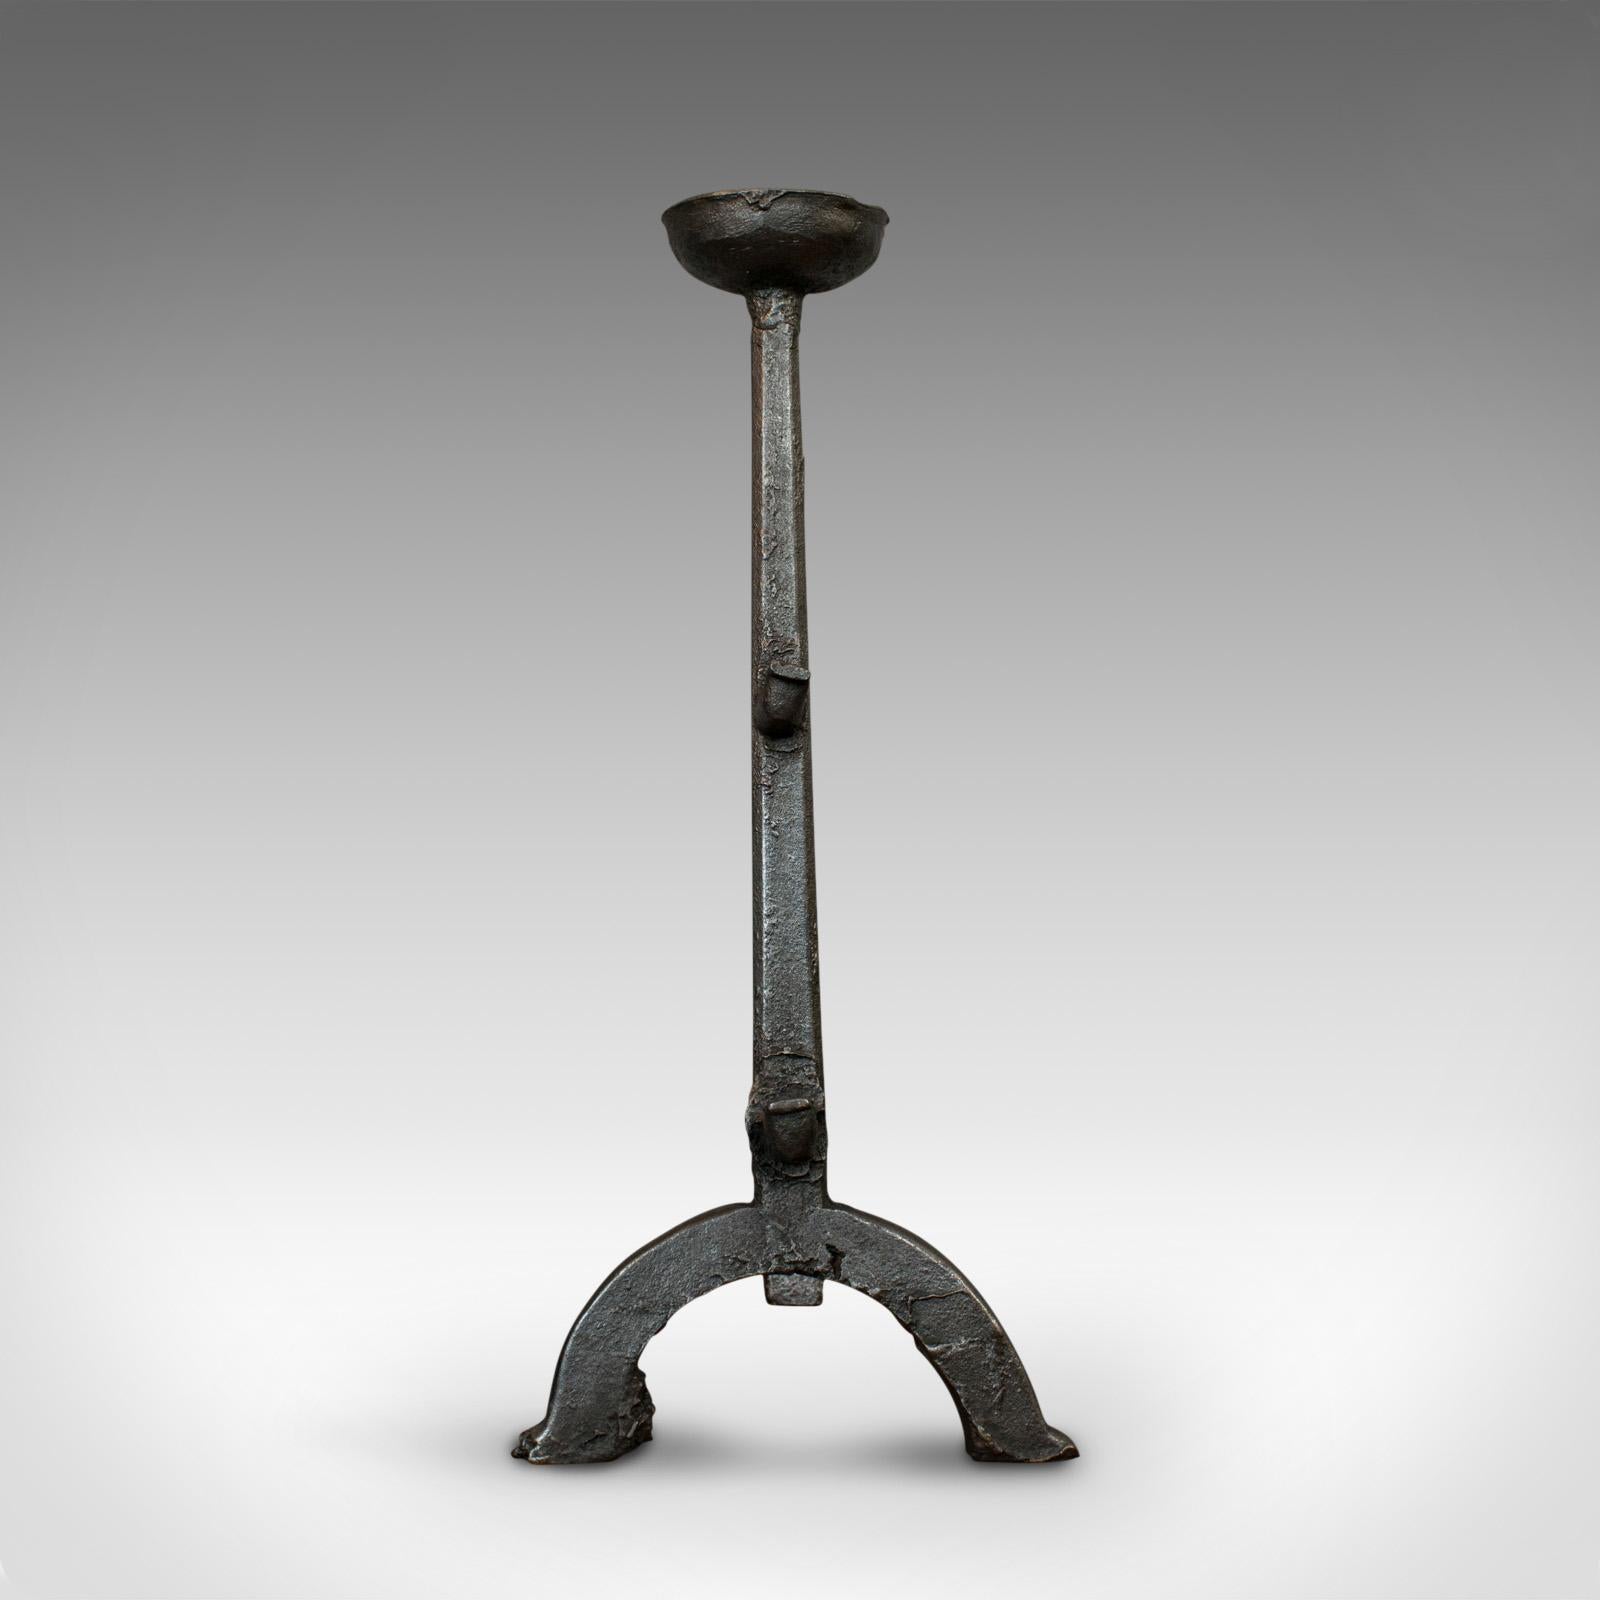 This is a large antique decorative andiron. An English, cast iron fireside firedog or candle stand, dating to the Georgian period, circa 1800.

Classic Georgian fireside interest
Displays a desirable aged patina
Cast iron in good order with